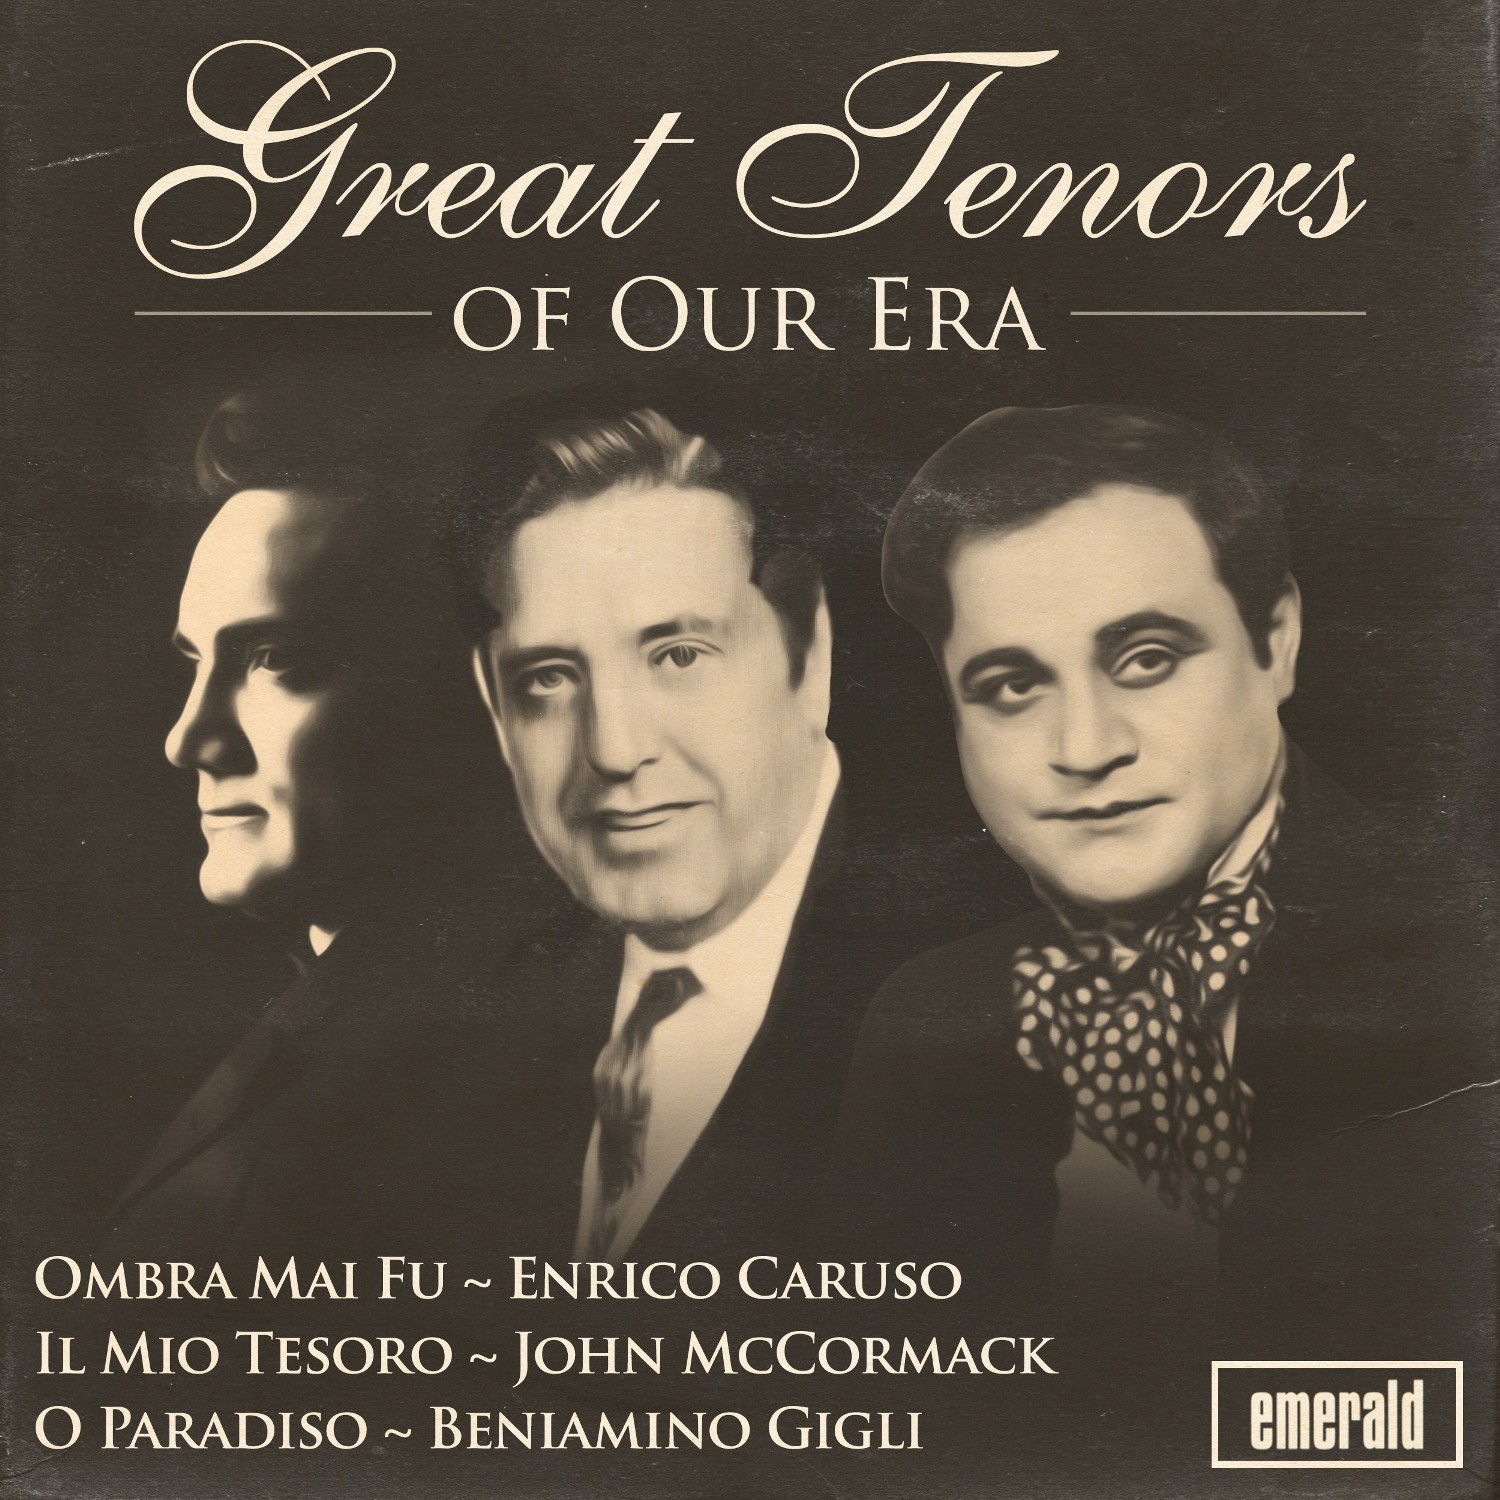 Great Tenors of Our Era